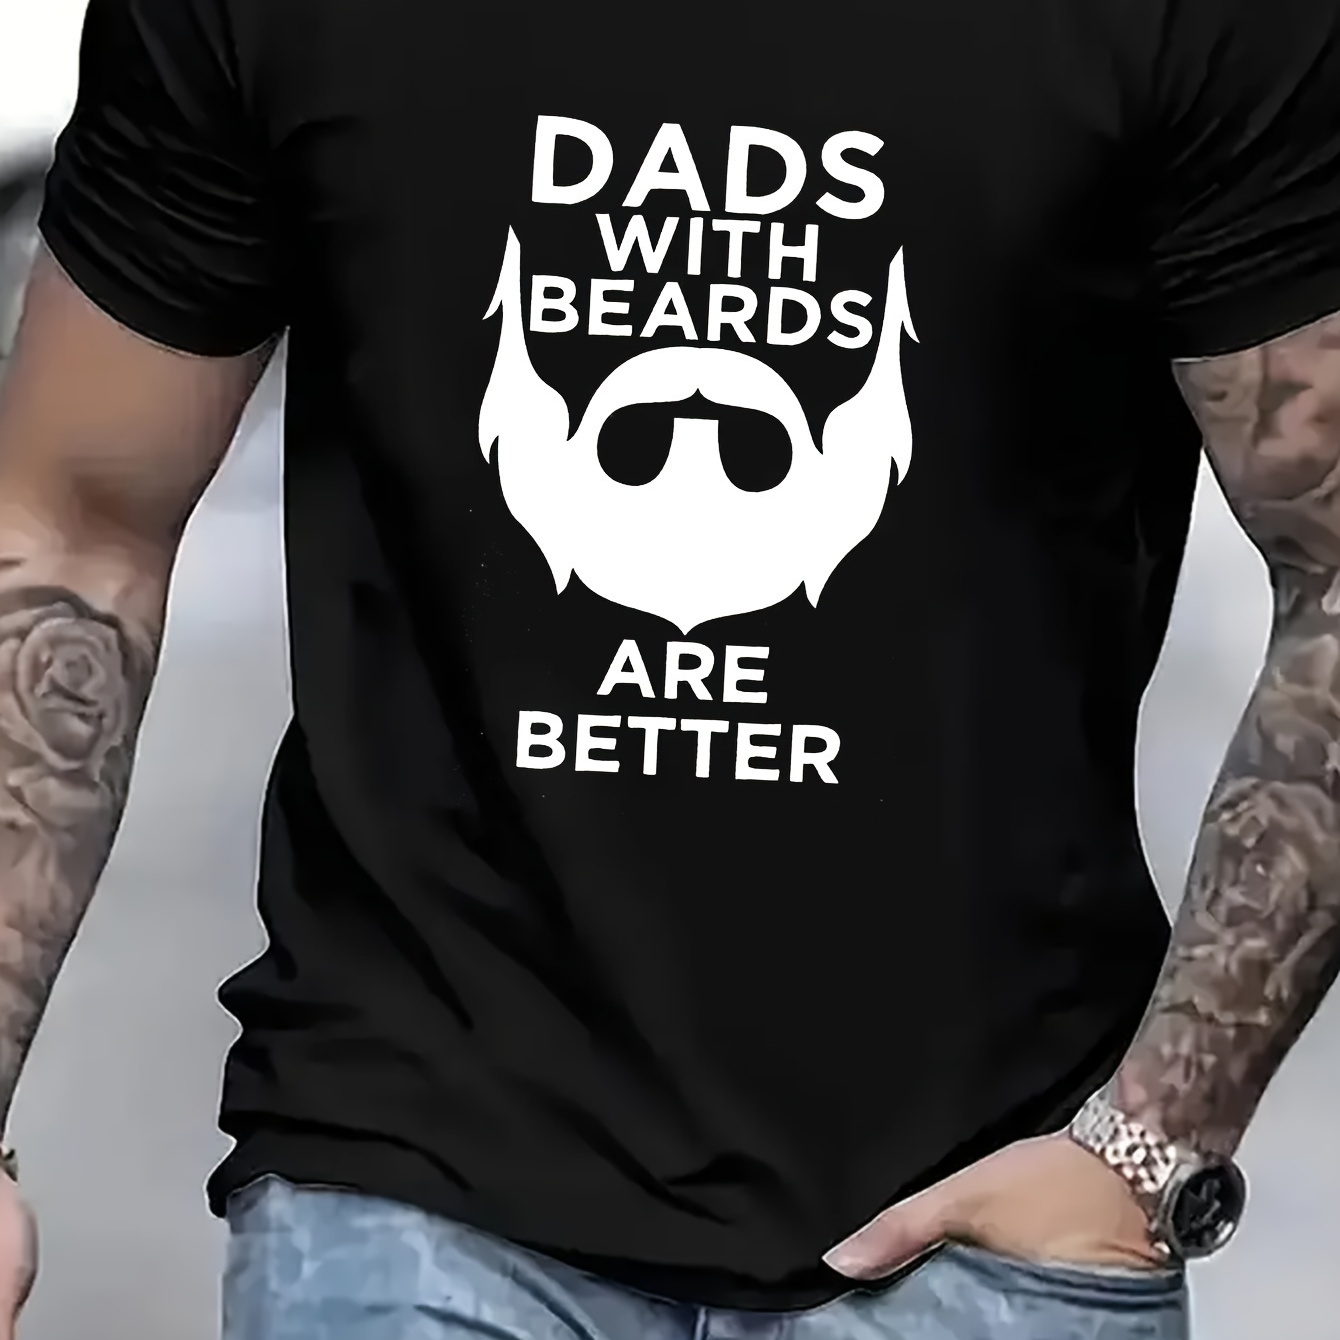 

Dad With Beards Are Better Men's Front Print T-shirt 100% Cotton Graphic Tee Summer Casual Tee Streetwear Top